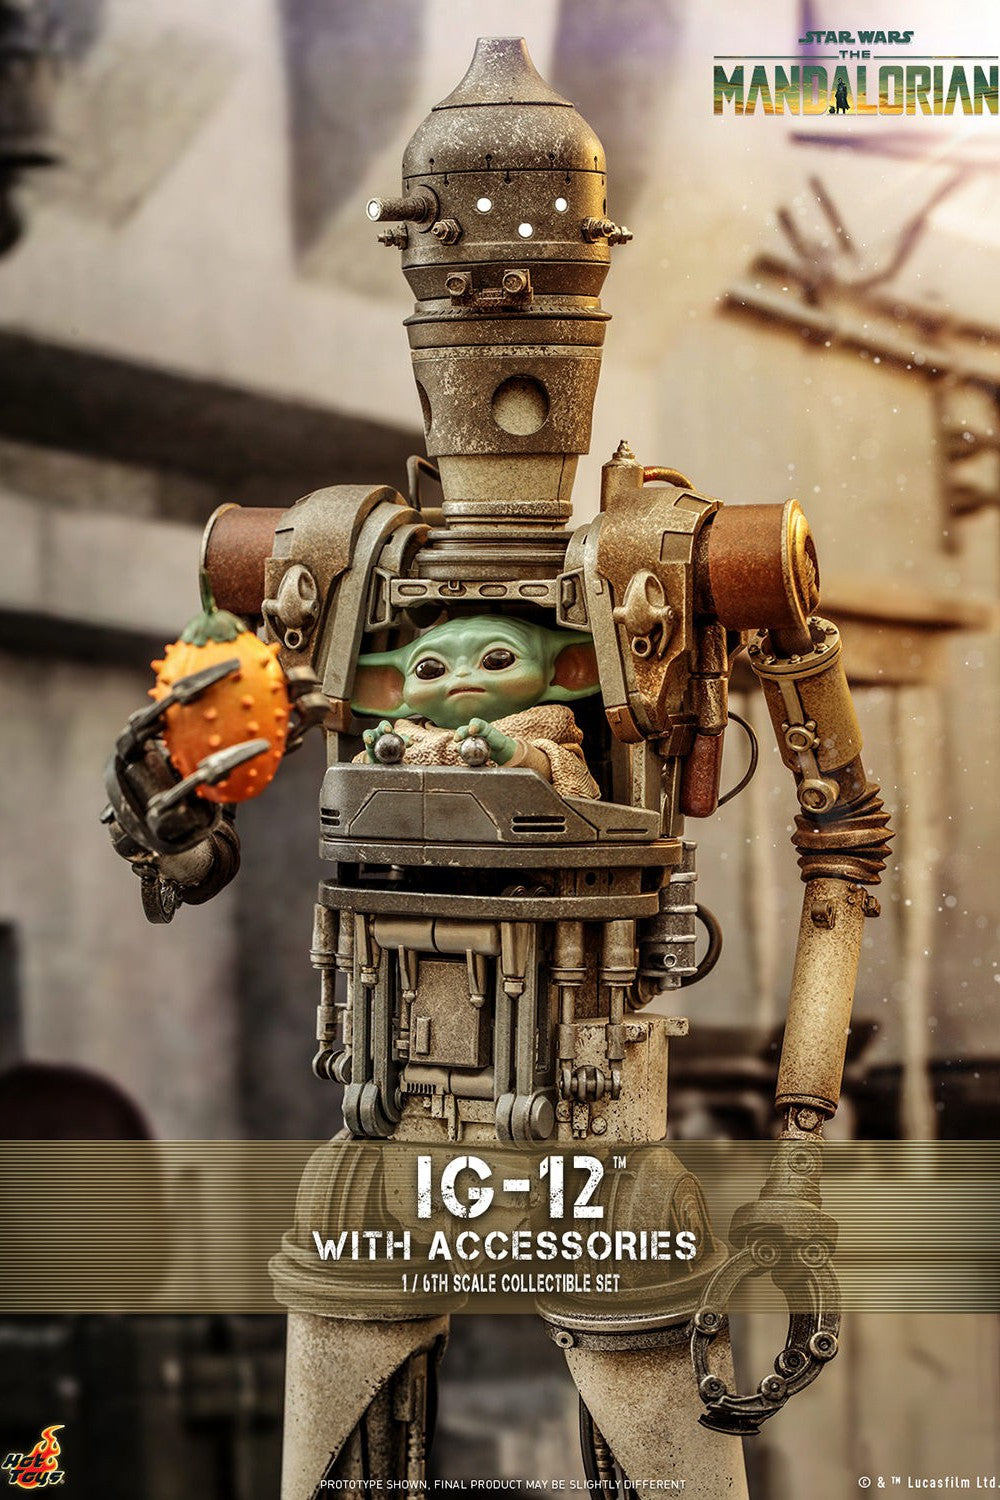 IG-12: With Accessories: Star Wars: The Mandalorian Hot Toys